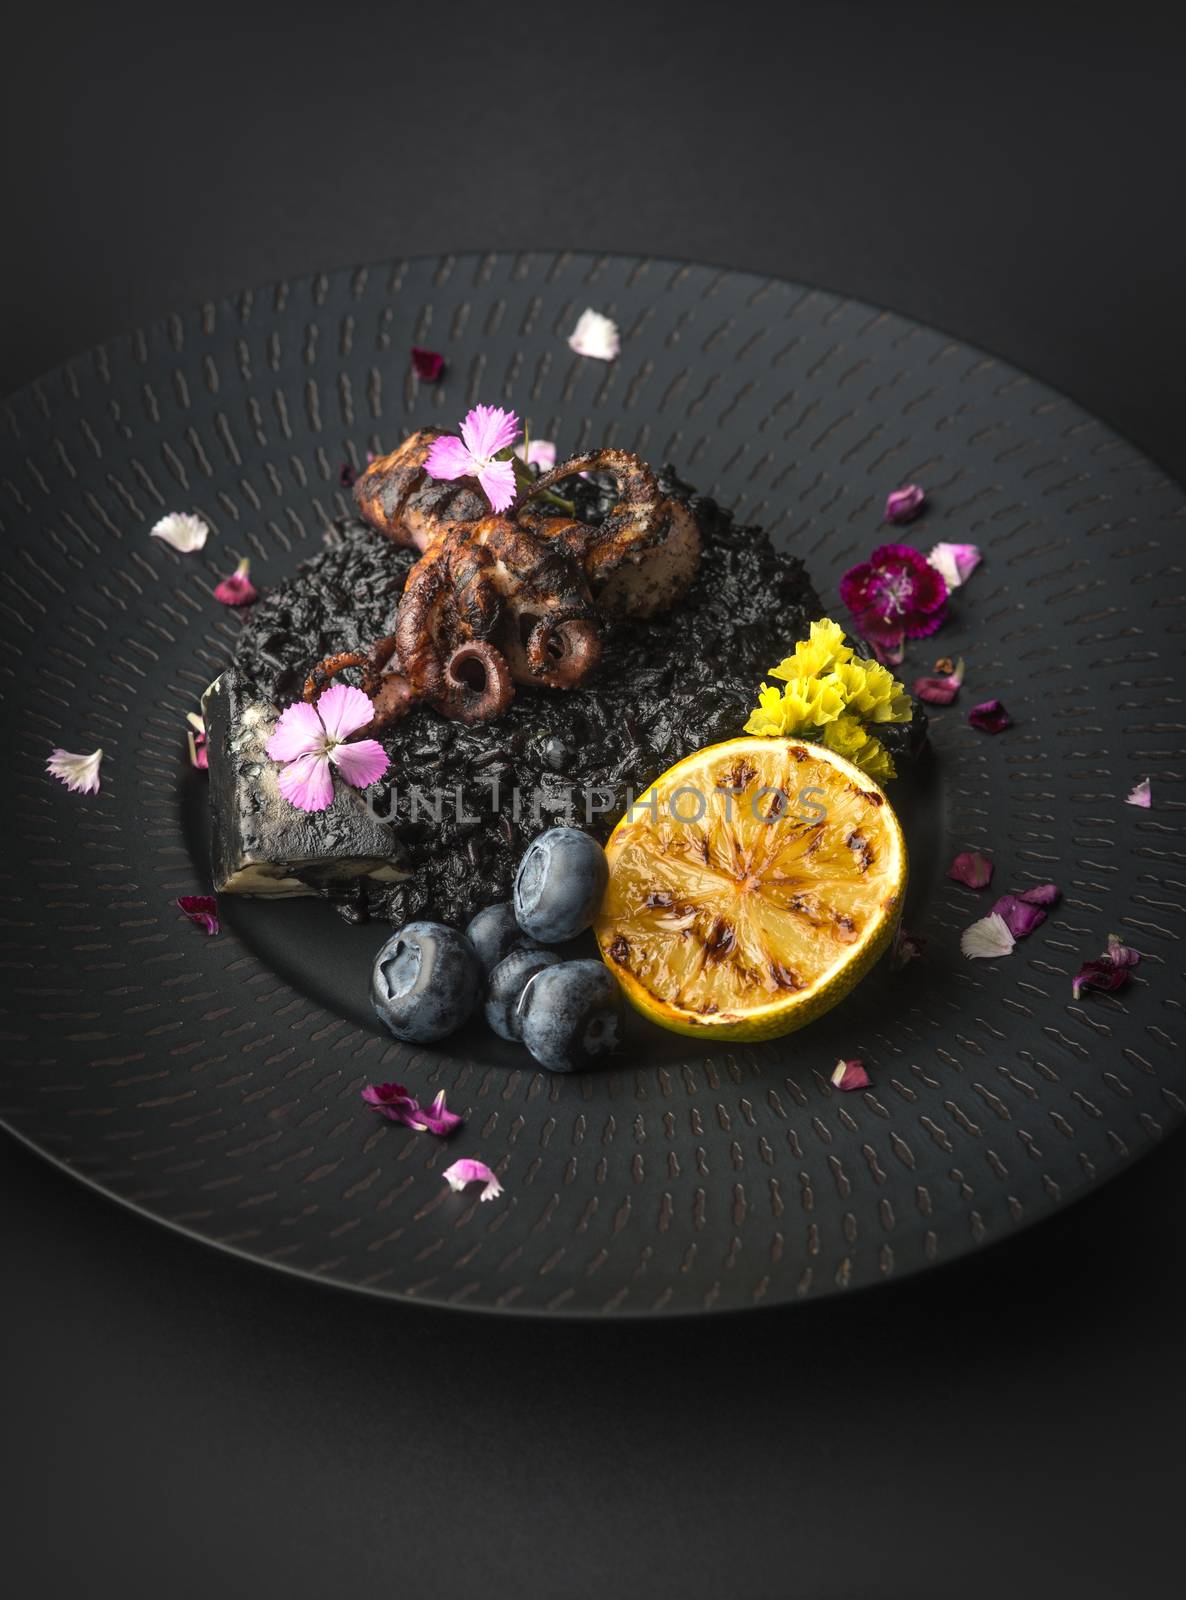 risotto with octopus and blueberries on a black plate on a black background